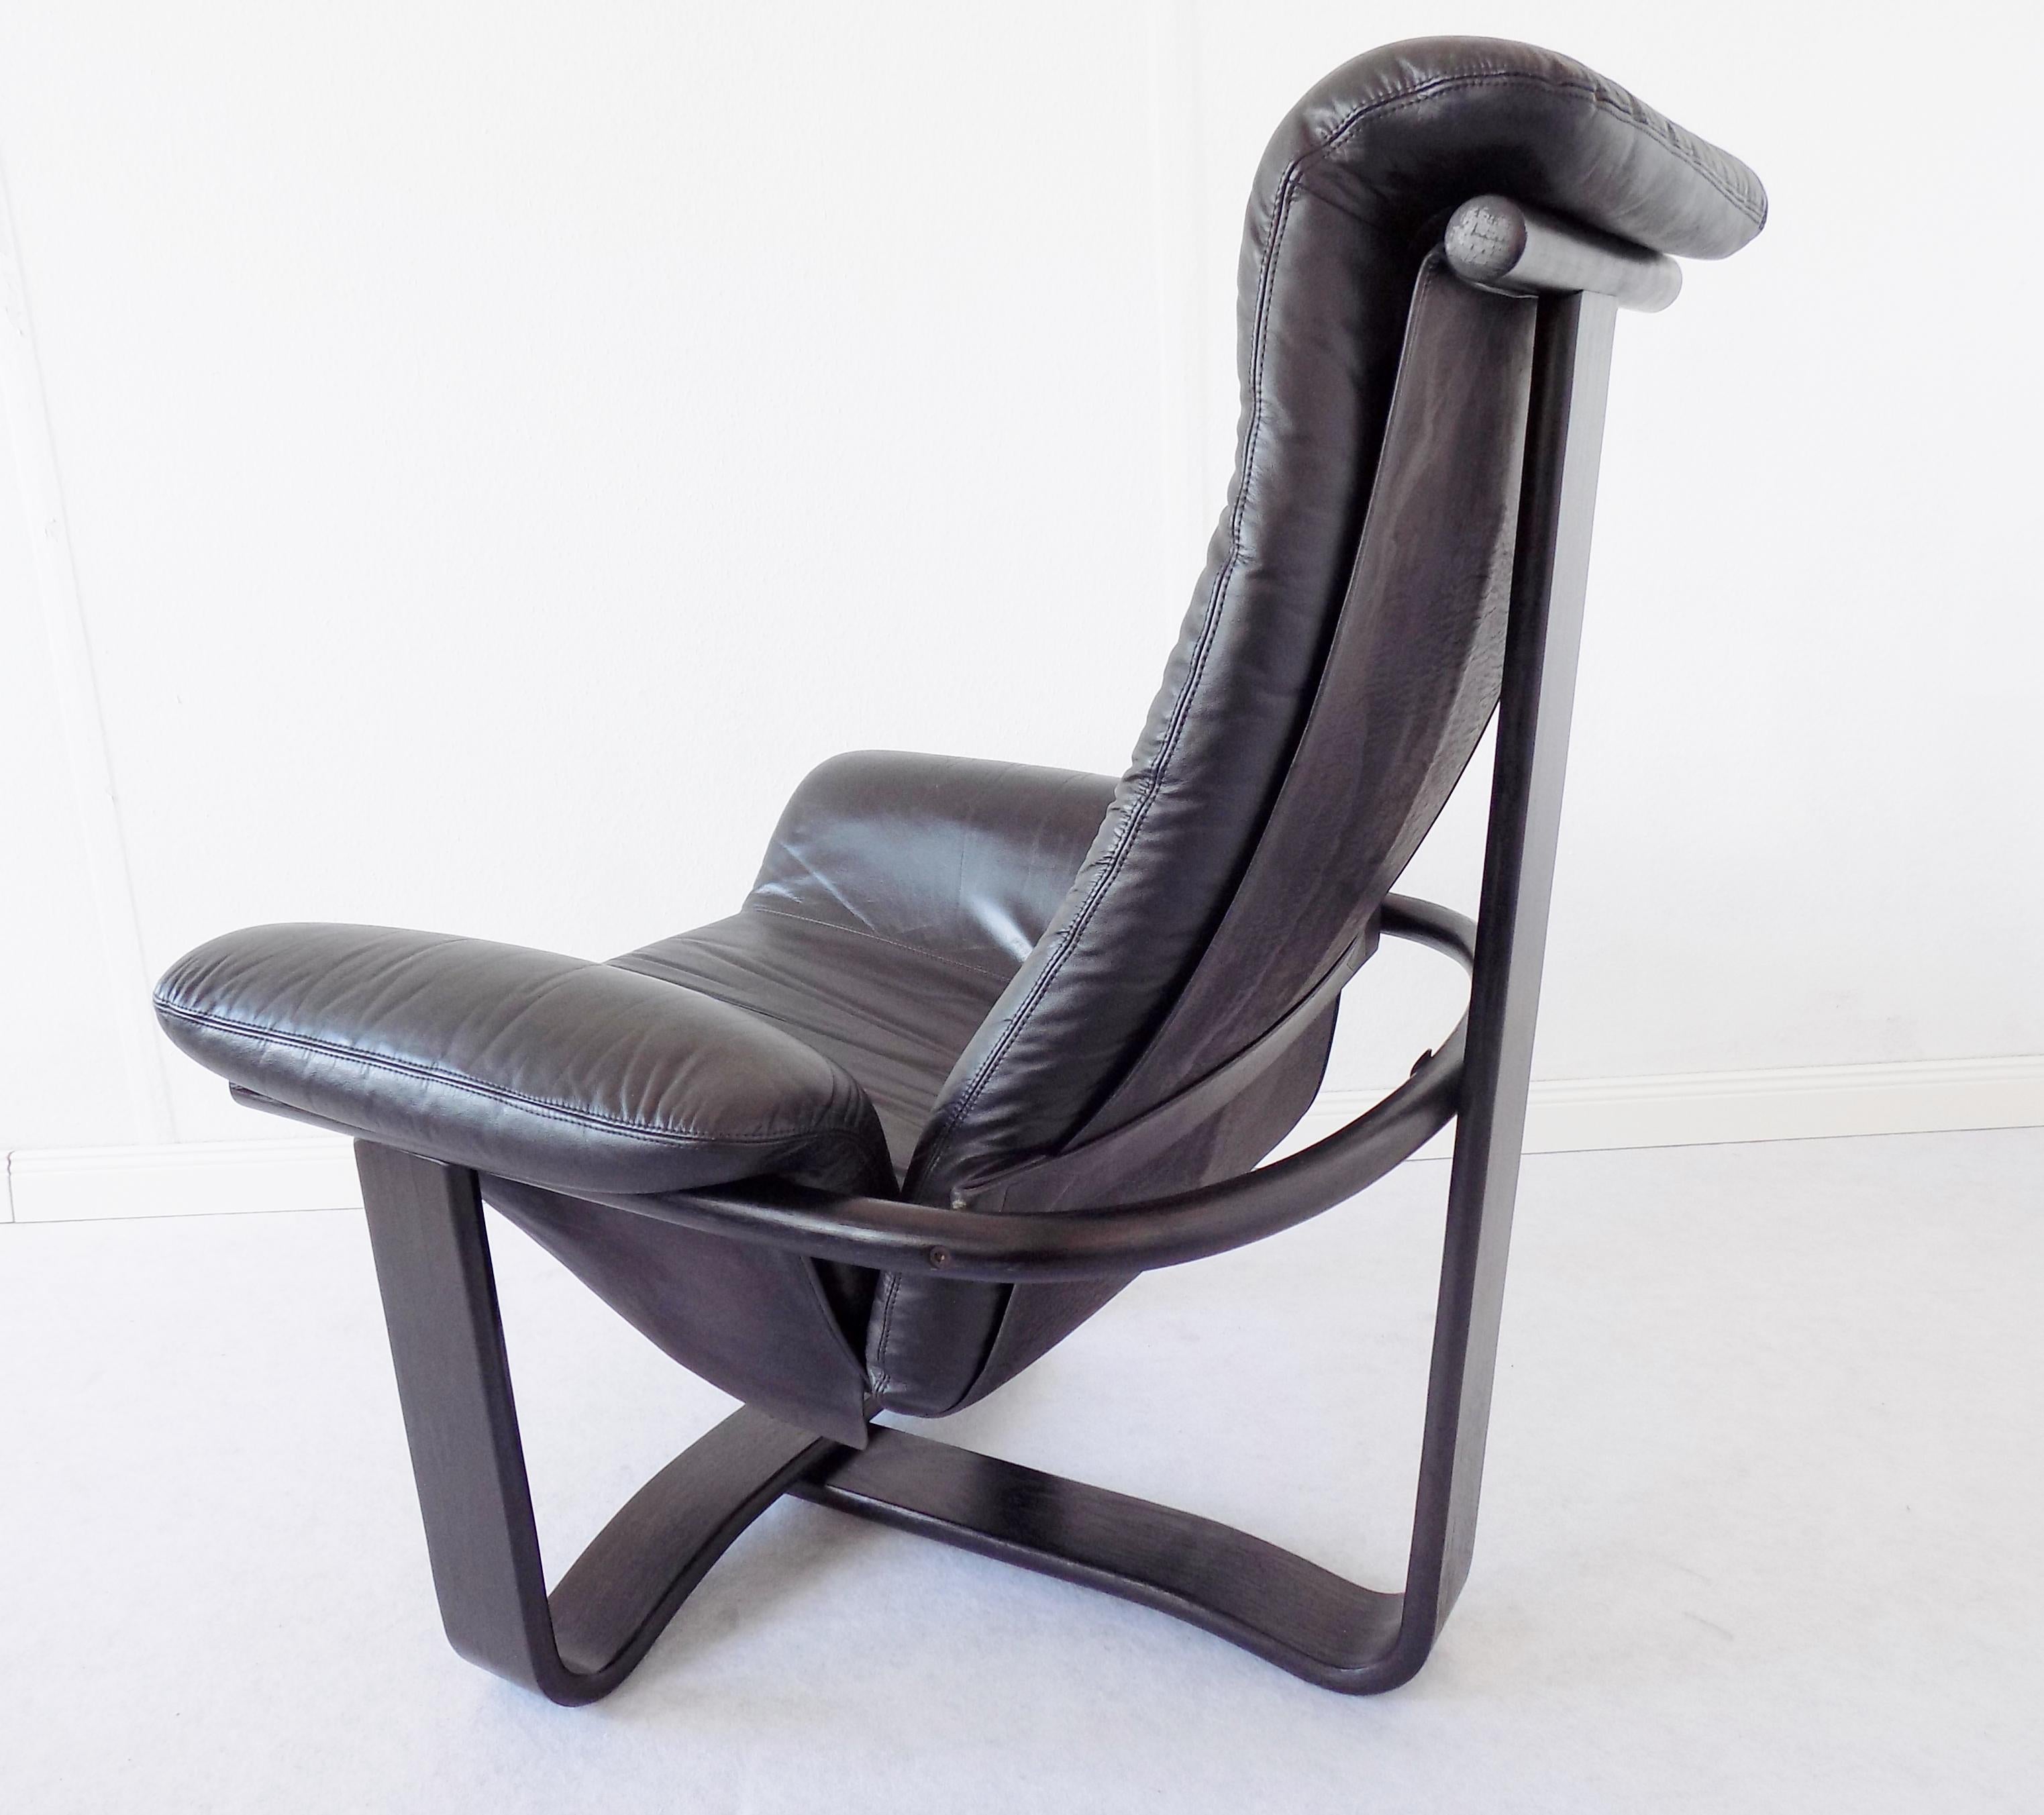 Manta Chair by Ingmar Relling for Westnofa, Black Leather, Scandinavian modern For Sale 4